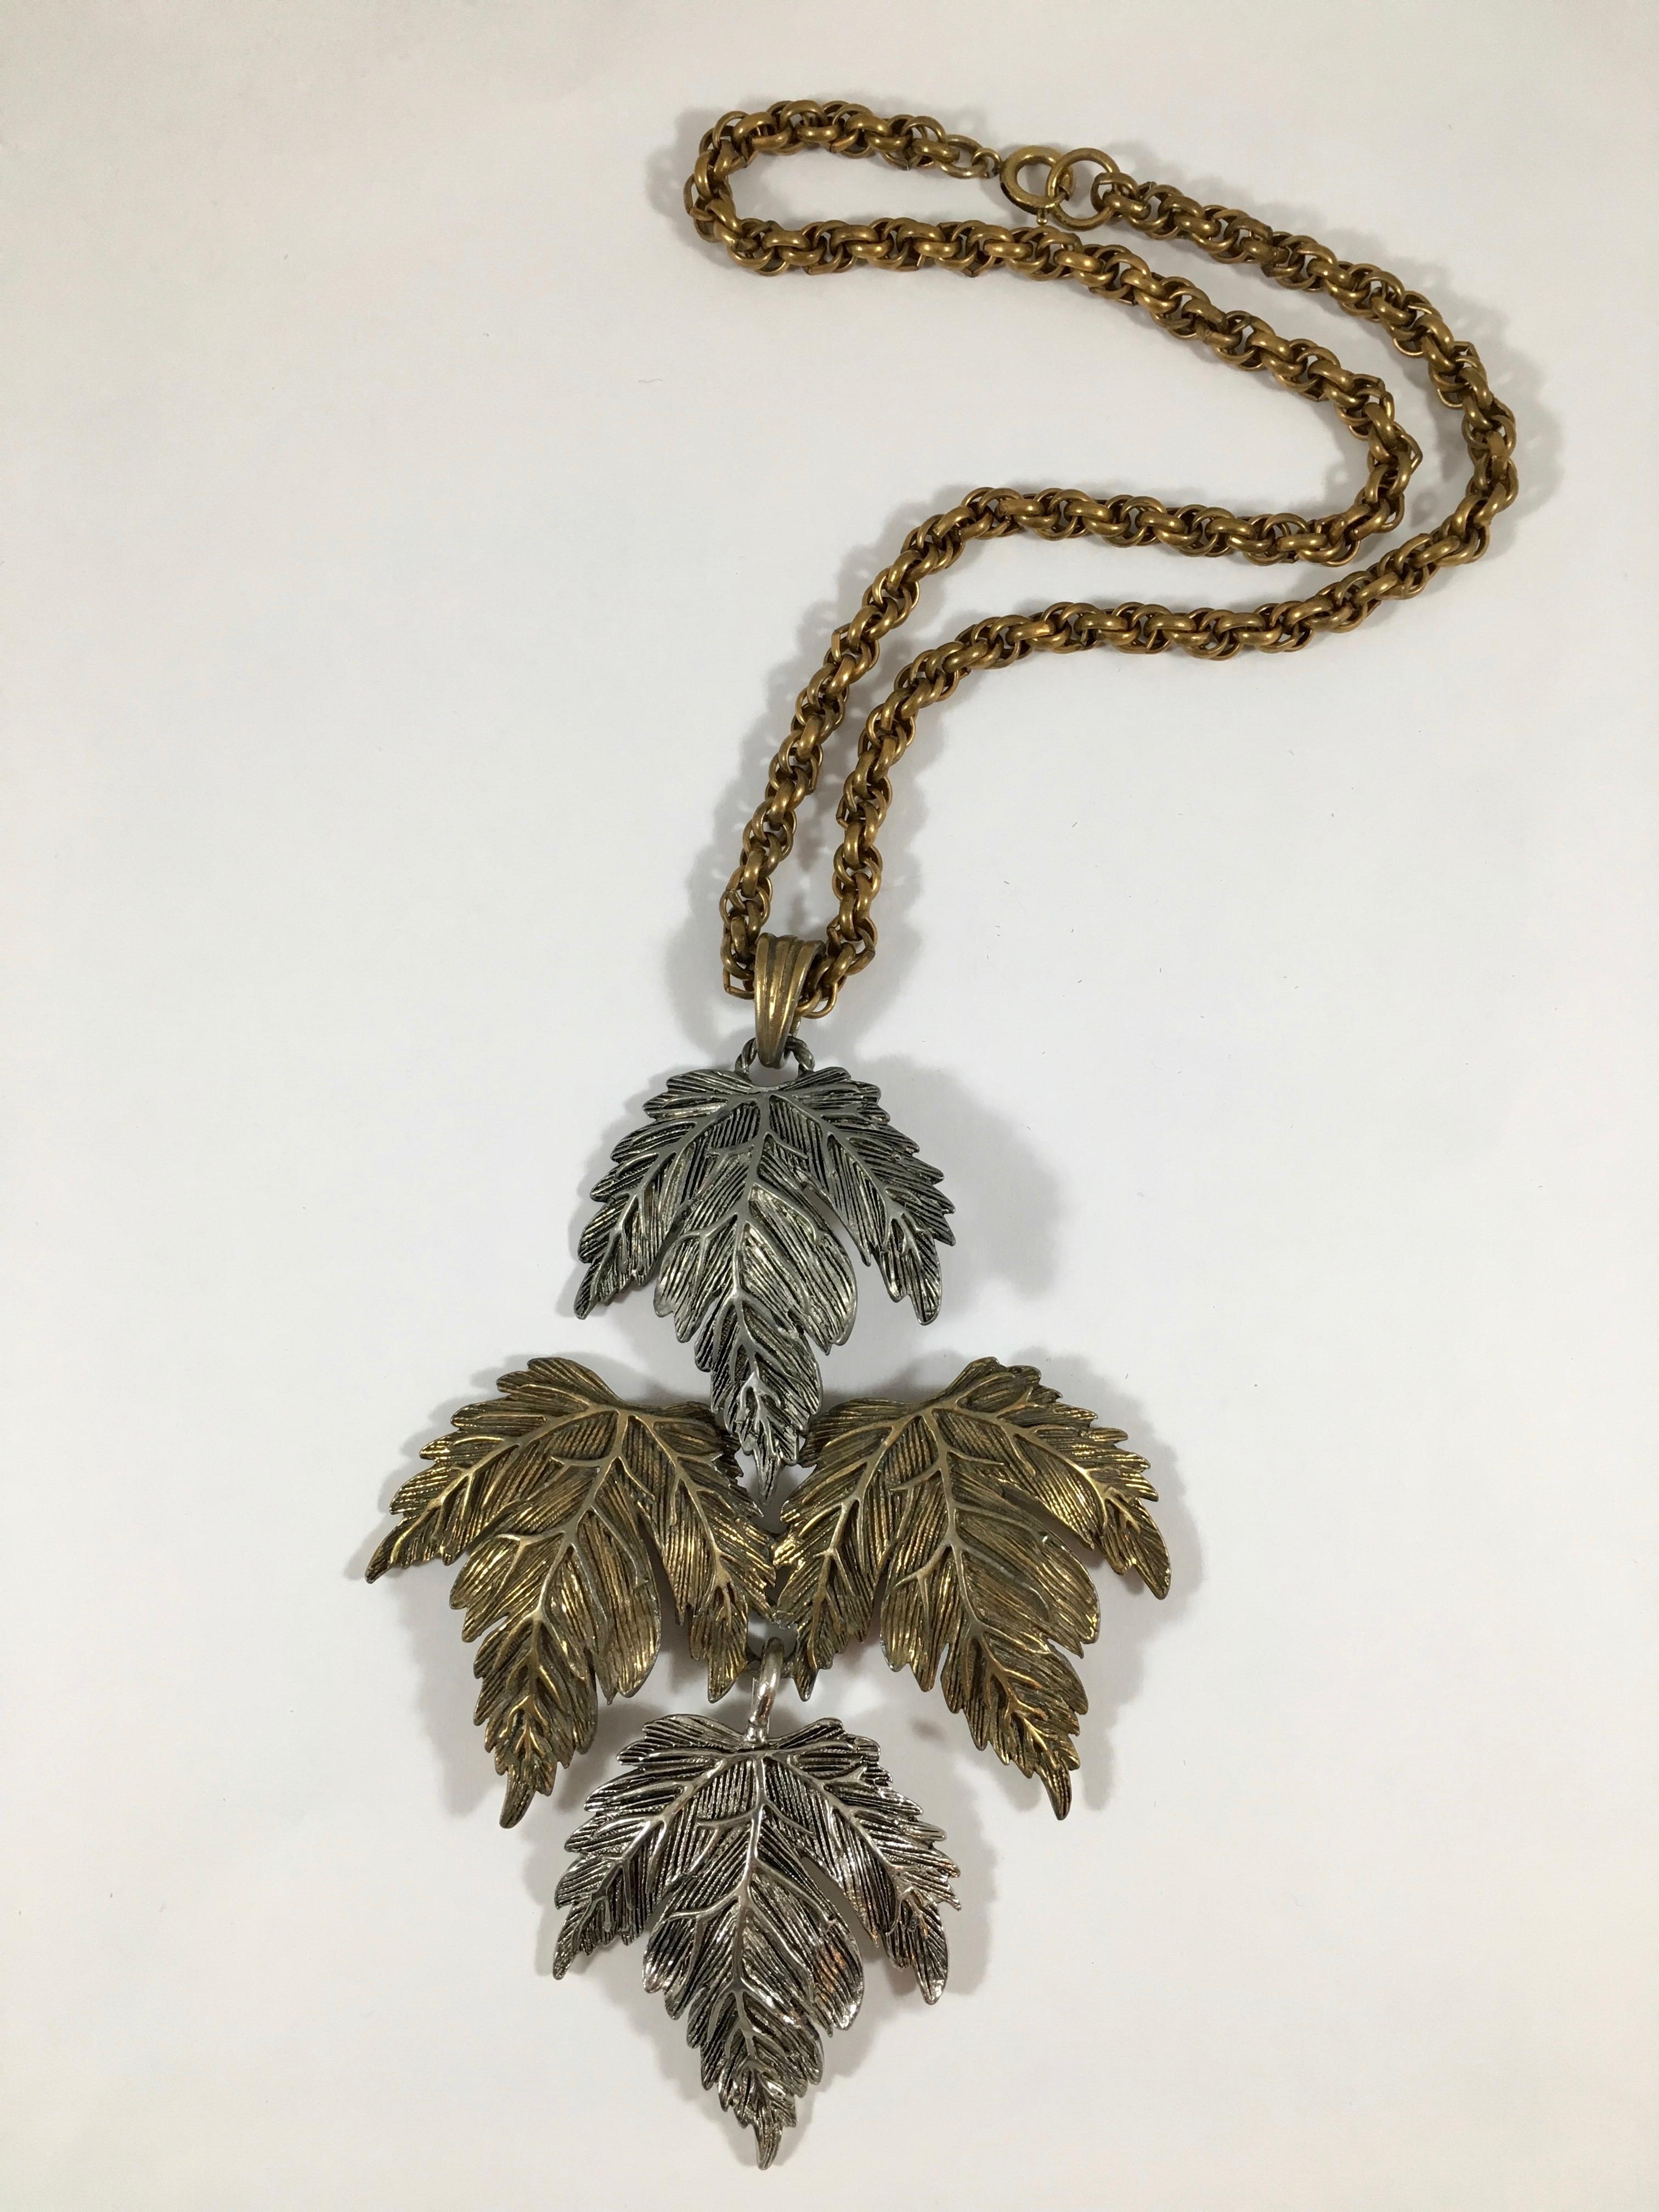 This 1950s Castlecliff necklace has a huge beautifully detailed leaf pendant made up of two silver colored leaves and two copper colored leaves. The pendant measures 5 inches long x  3 5/8 inches wide and hangs from an 18 inch copper colored chain